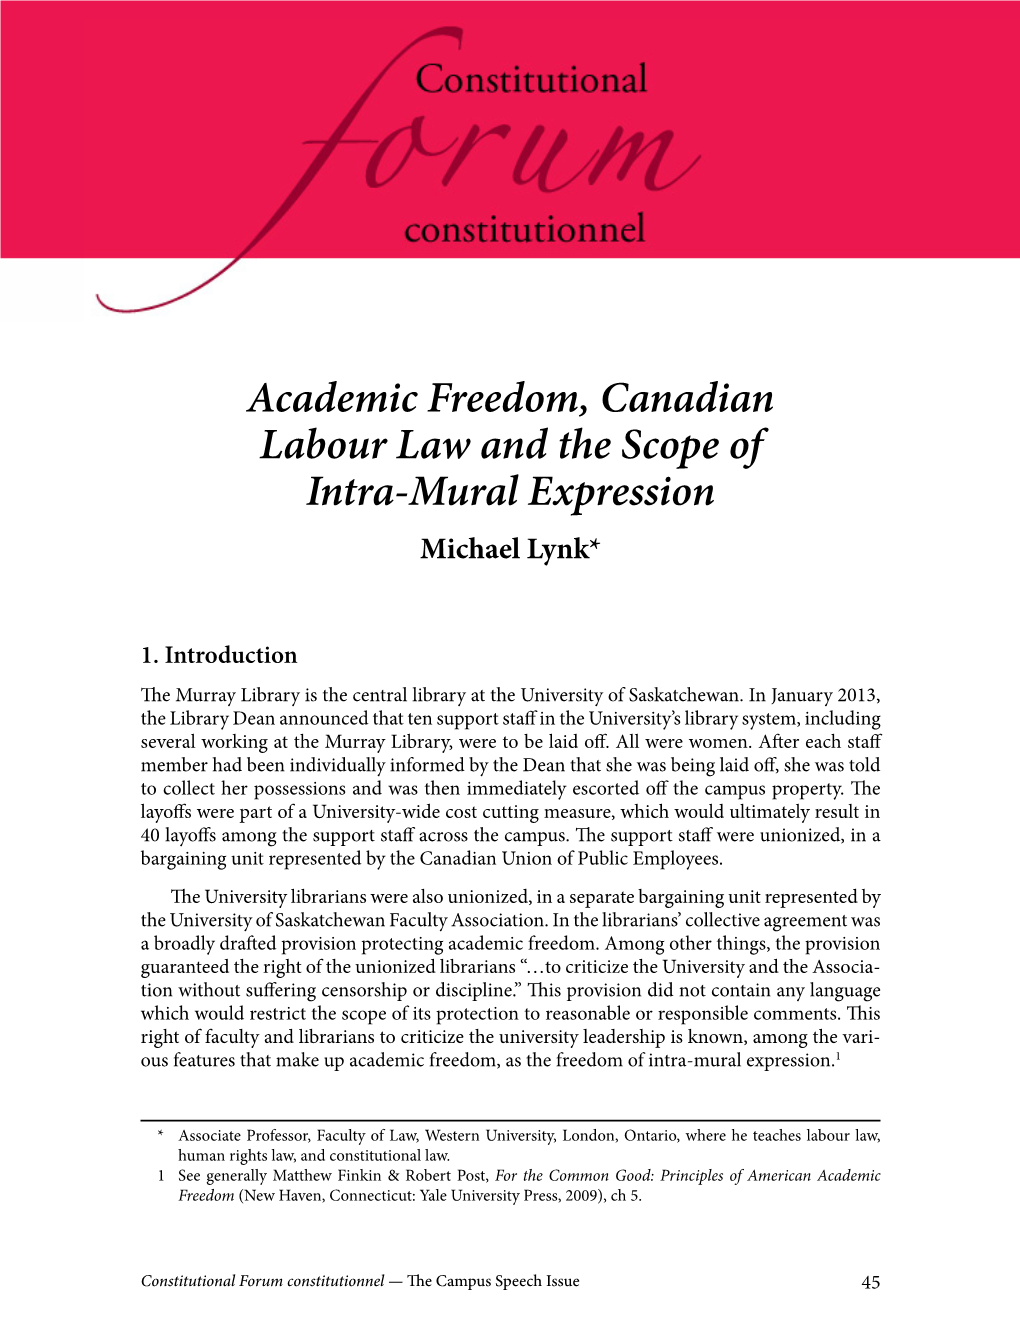 Academic Freedom, Canadian Labour Law and the Scope of Intra-Mural Expression Michael Lynk*